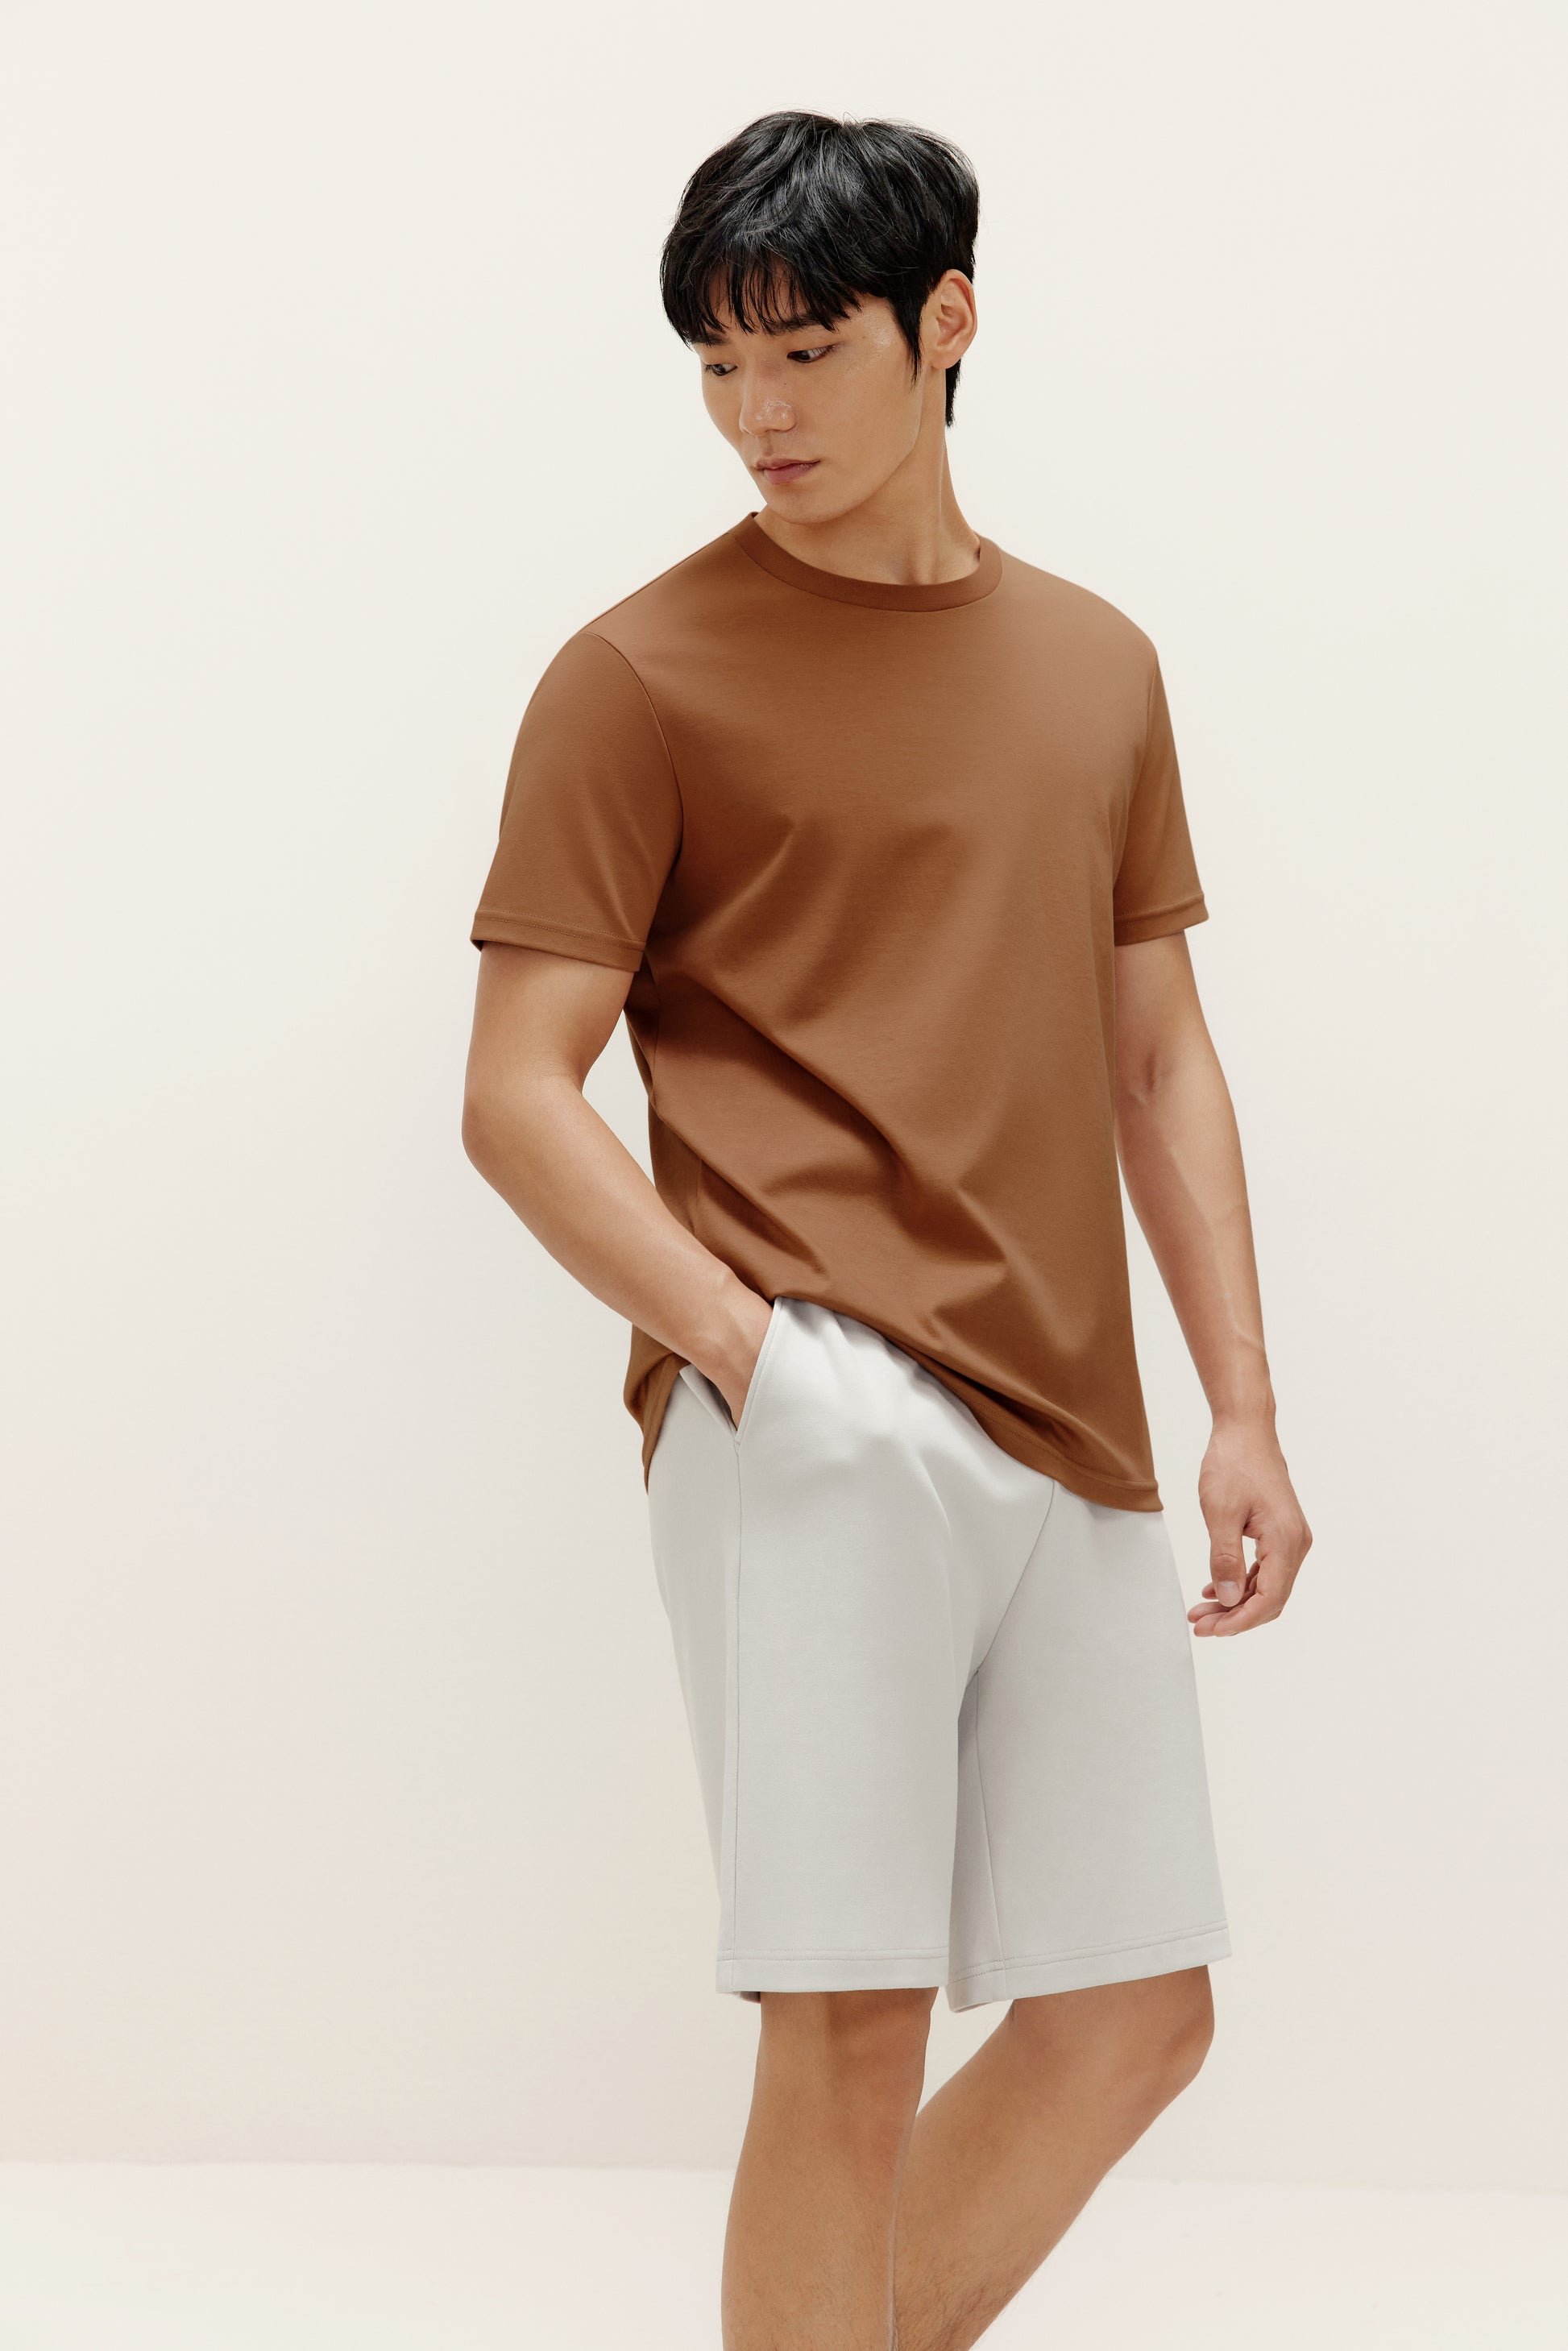 a man wearing brown t shirt and white shorts